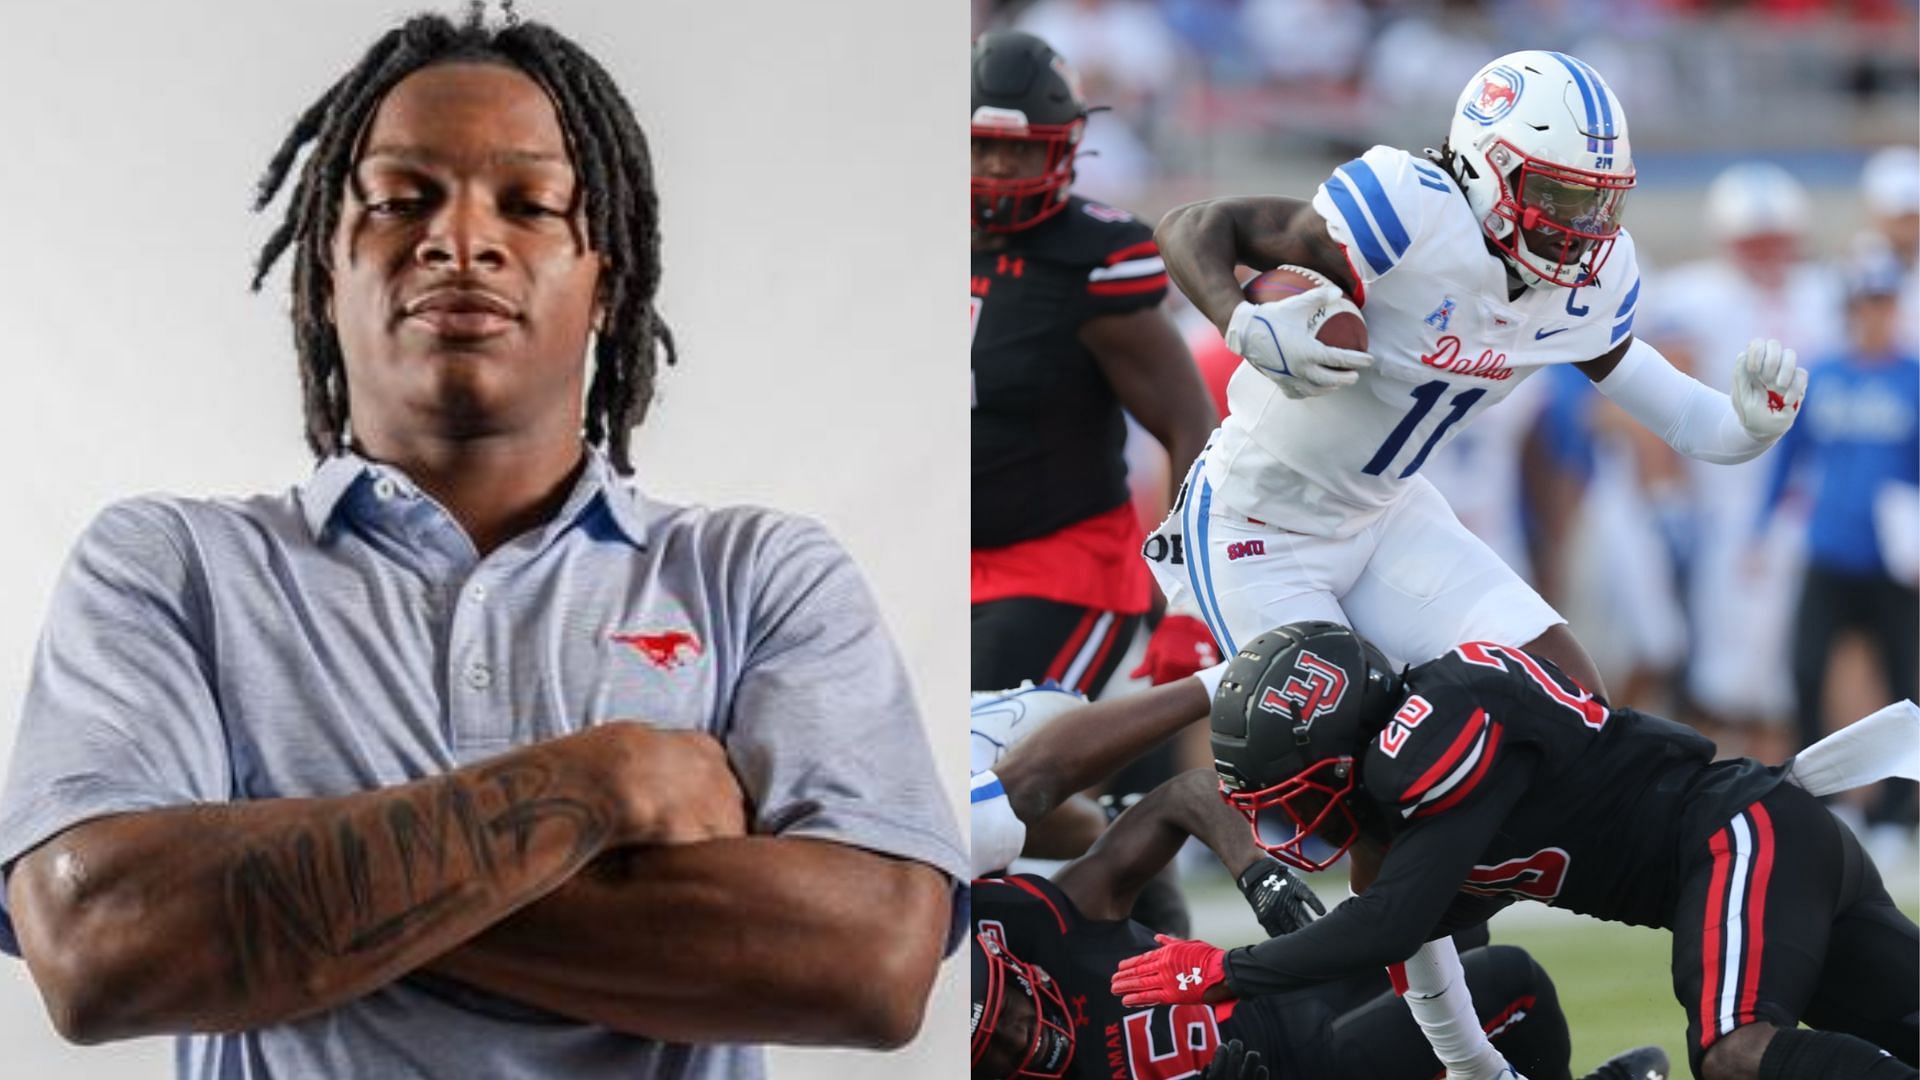 Teddy Knox has been suspended by the SMU Mustangs